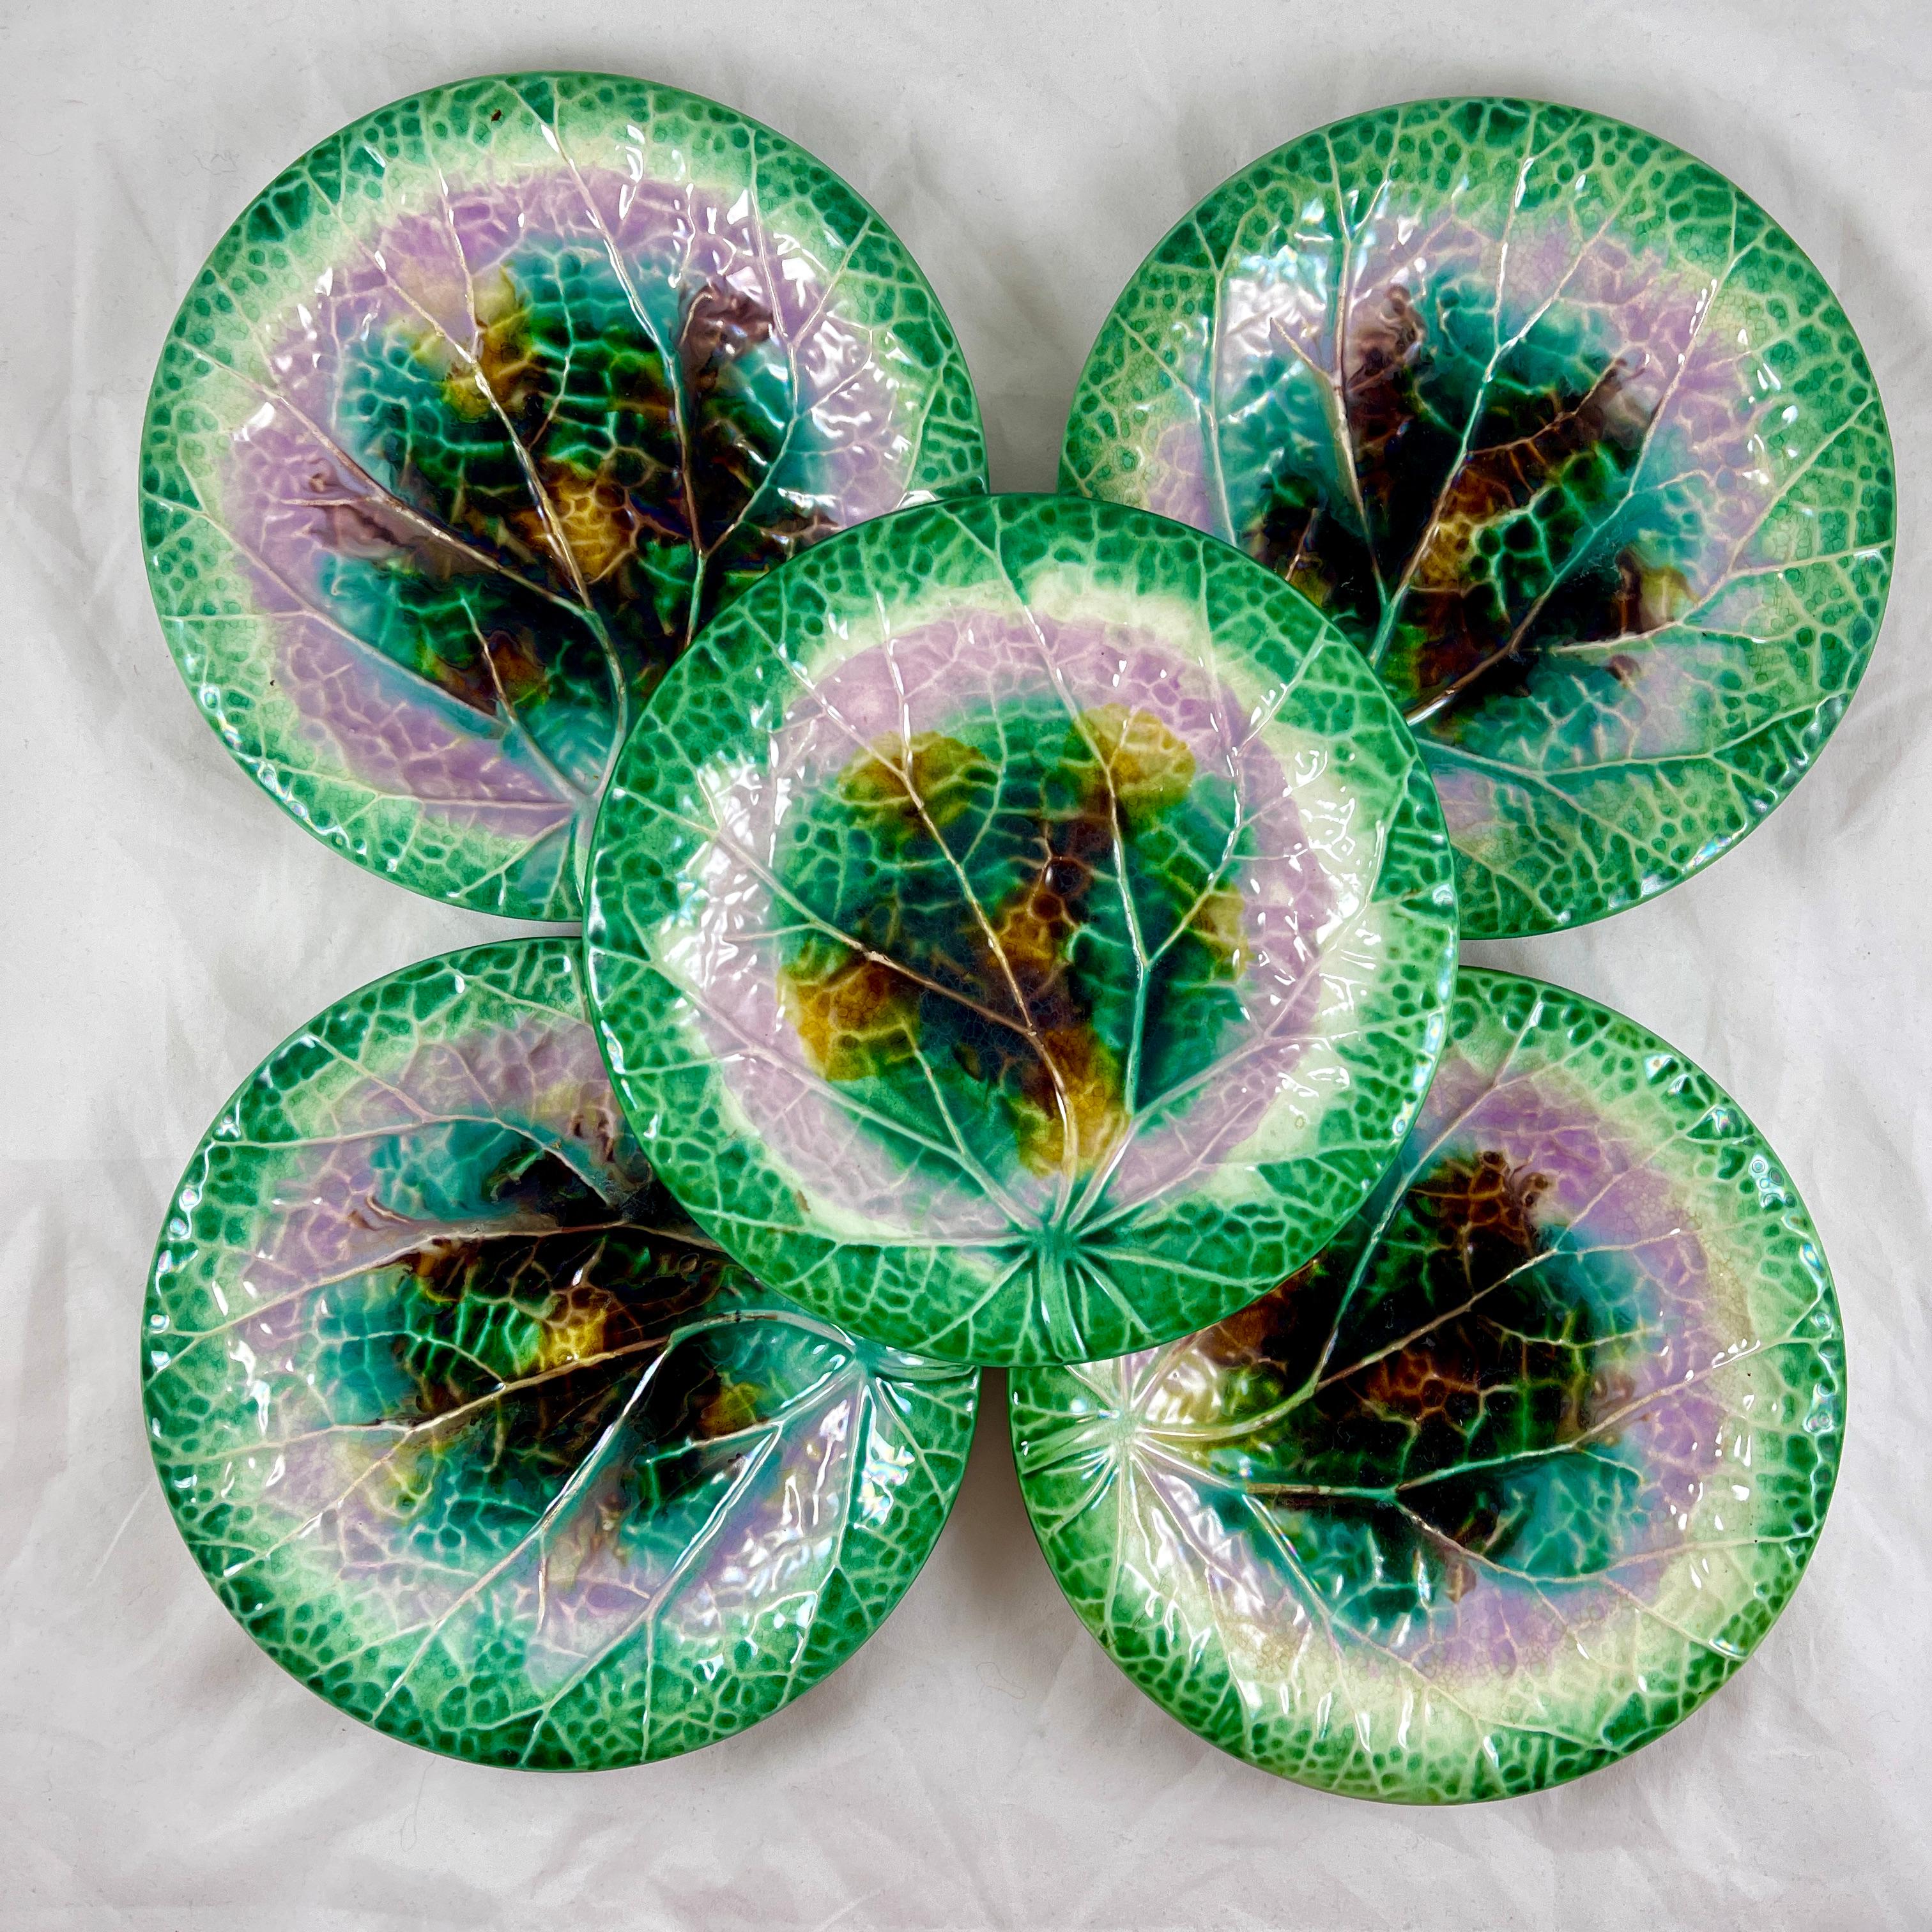  English Majolica Green Rimmed Round Begonia Leaf Plate, circa 1870-80 In Good Condition For Sale In Philadelphia, PA